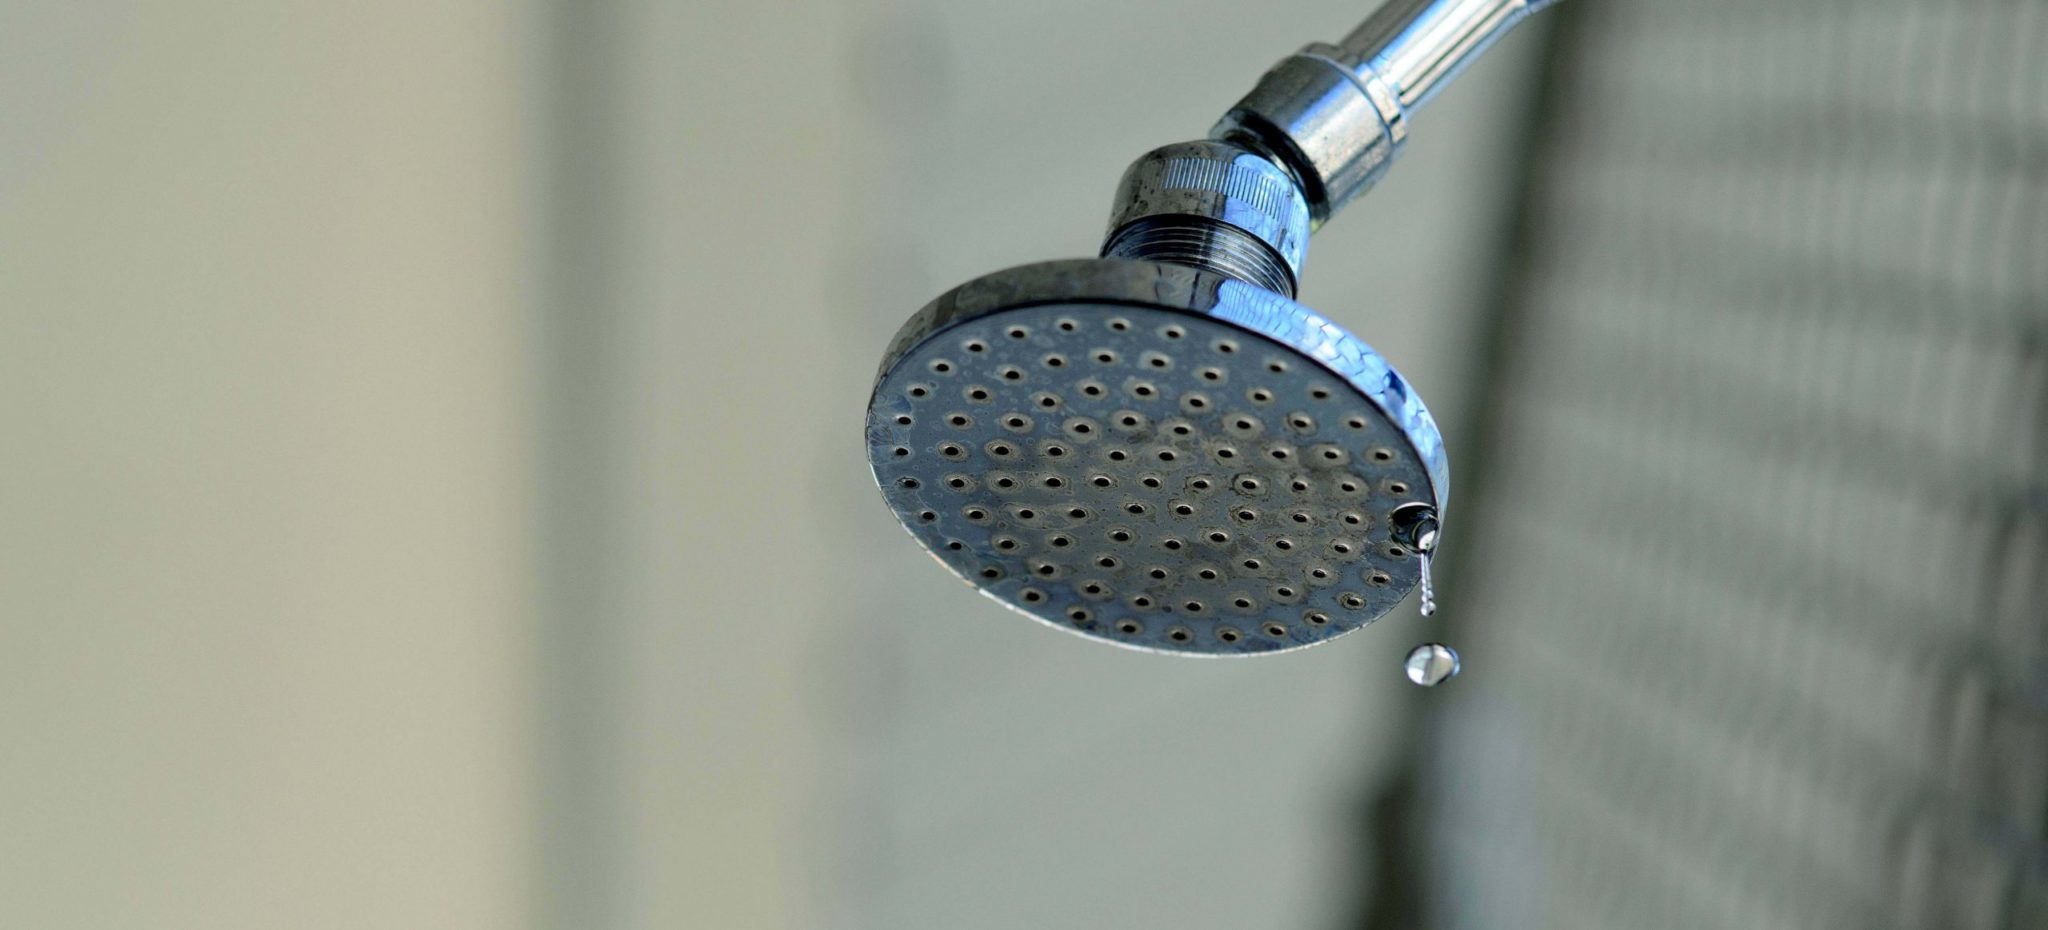 How To Fix A Handheld Shower Head That Is Leaking